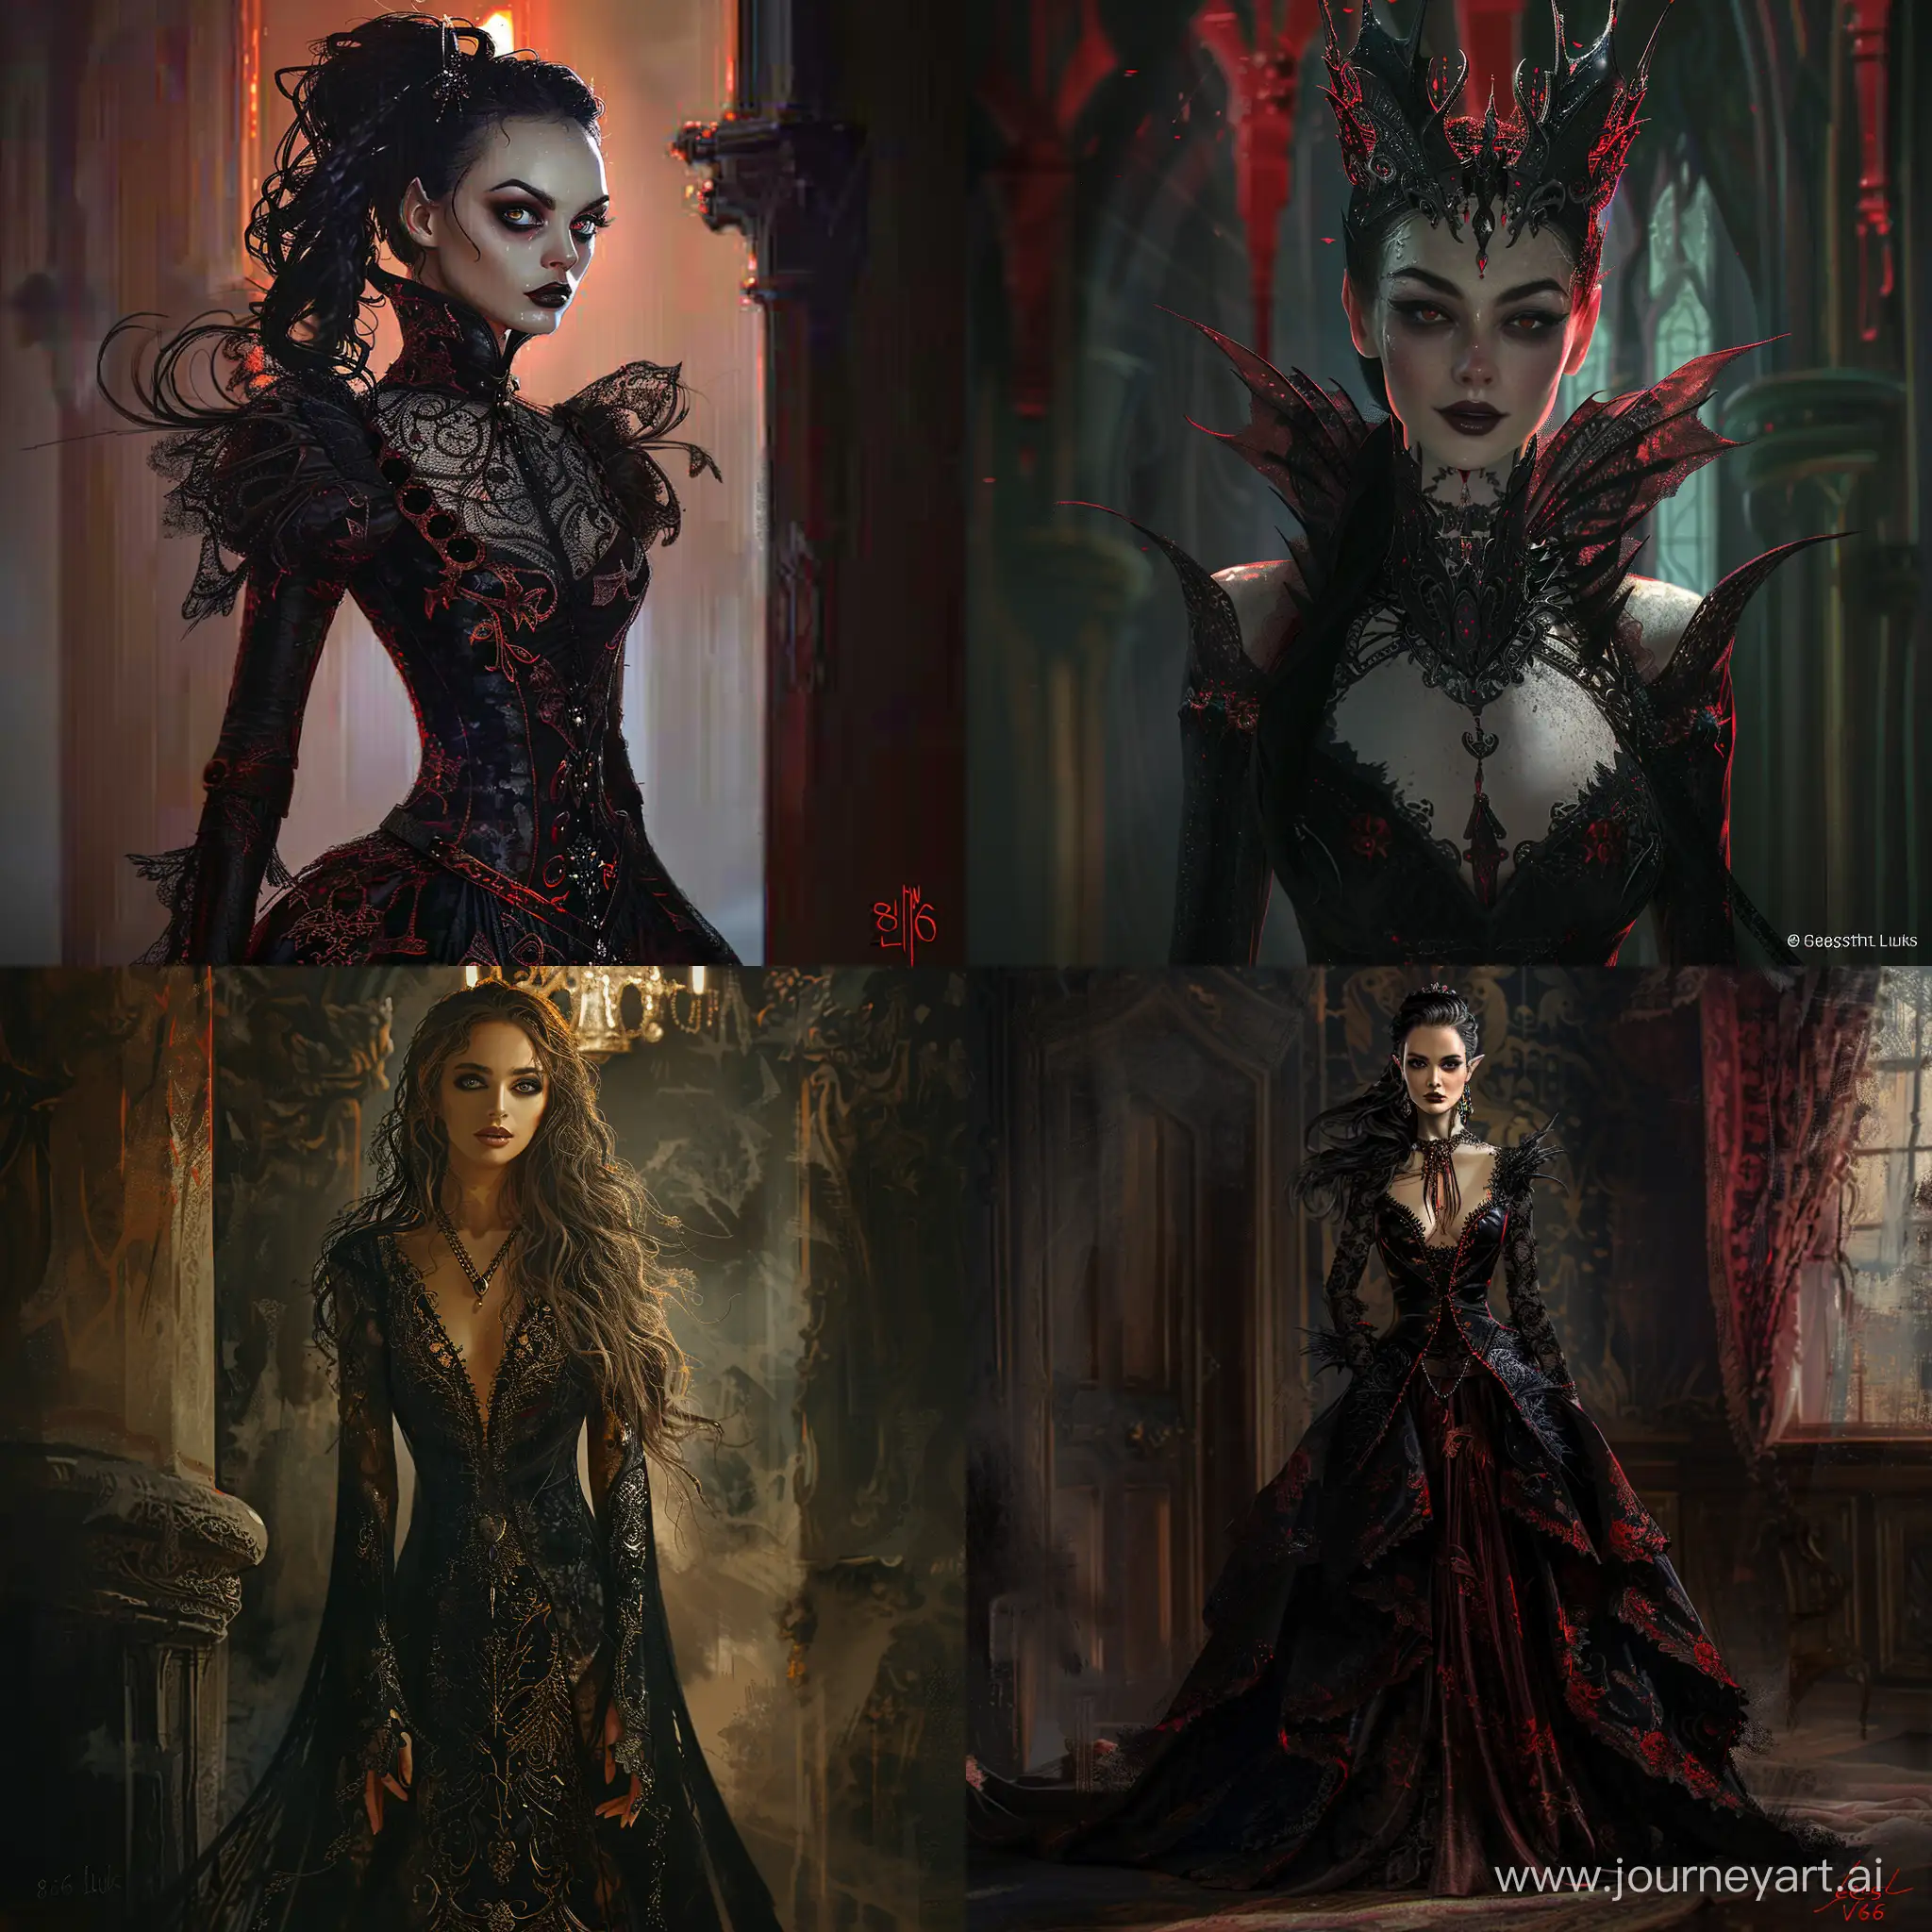 Gothic-Vampire-Lady-Intricate-and-Dramatic-Digital-Painting-by-George-Luks